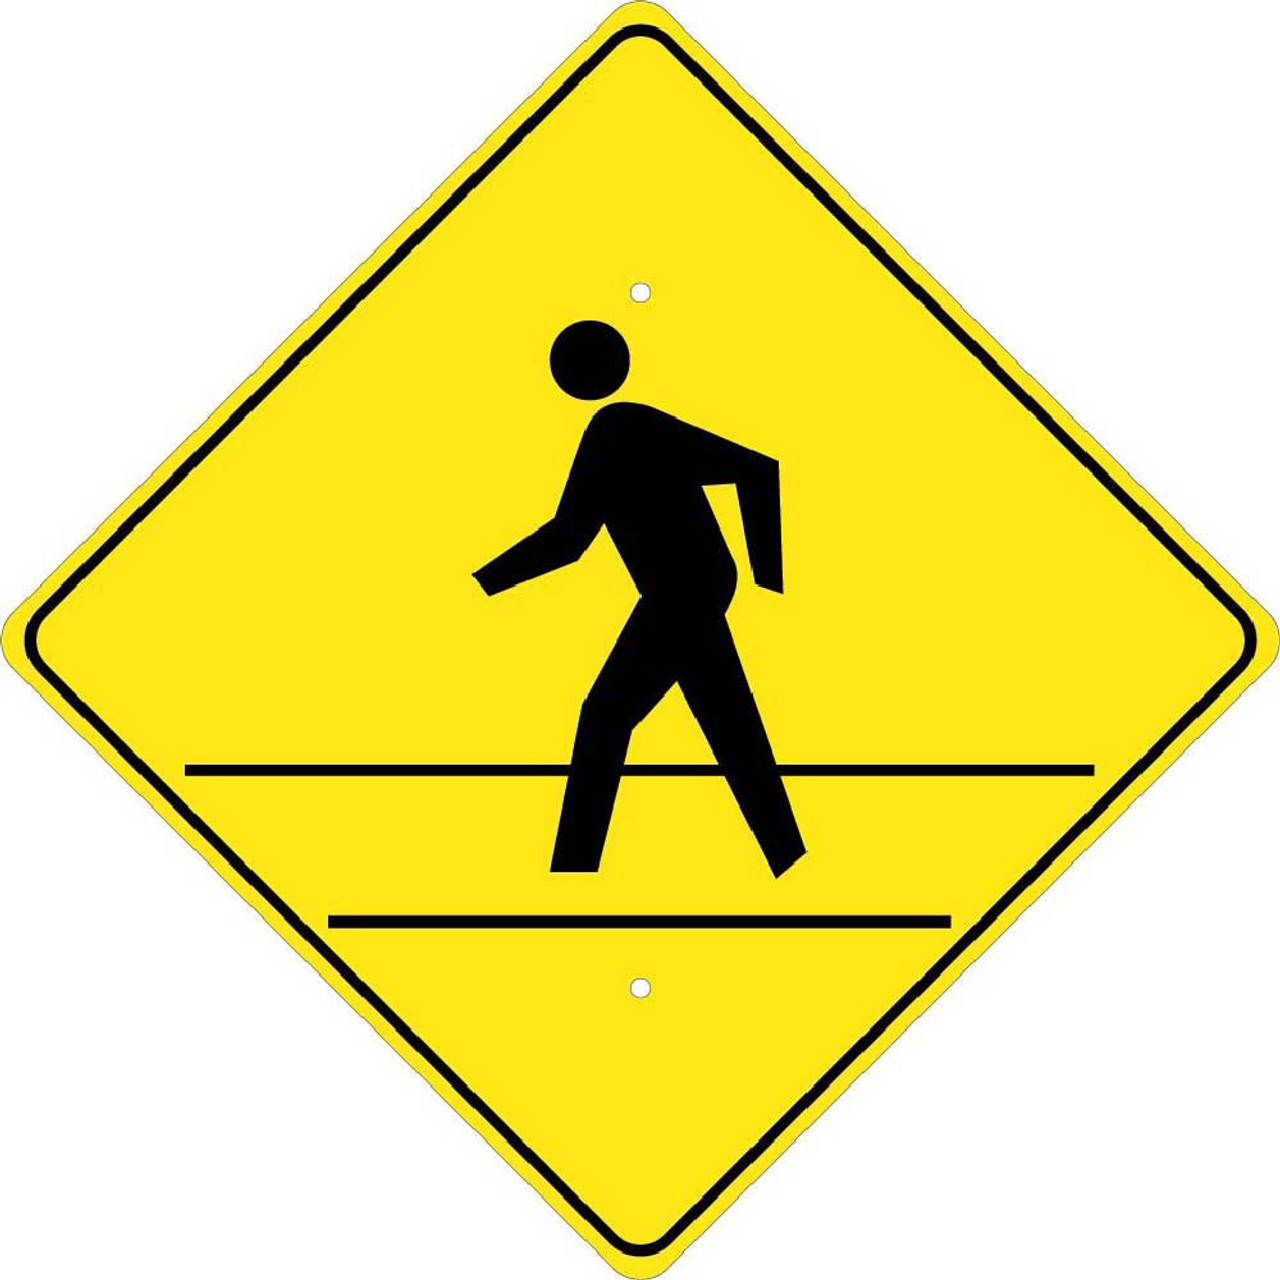 Accuform 18 X 12 Black And Yellow Engineer Grade Reflective Aluminum  Traffic Signs CAUTION SLOW DOWN PEDESTRIAN TRAFFIC